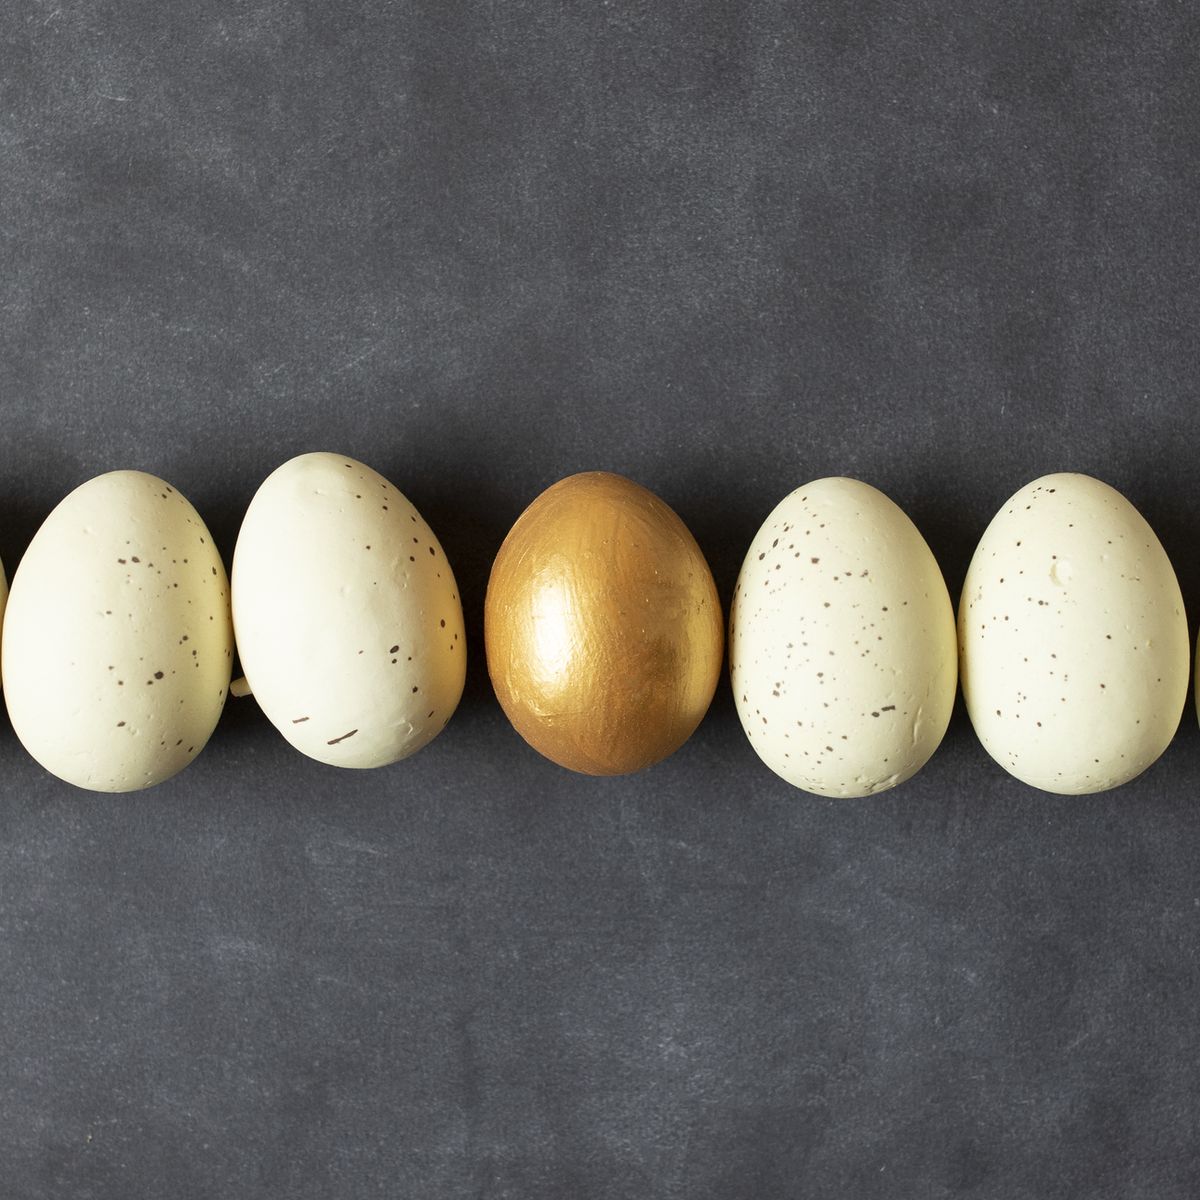 Eggs and one golden egg in nest basket on the black background.